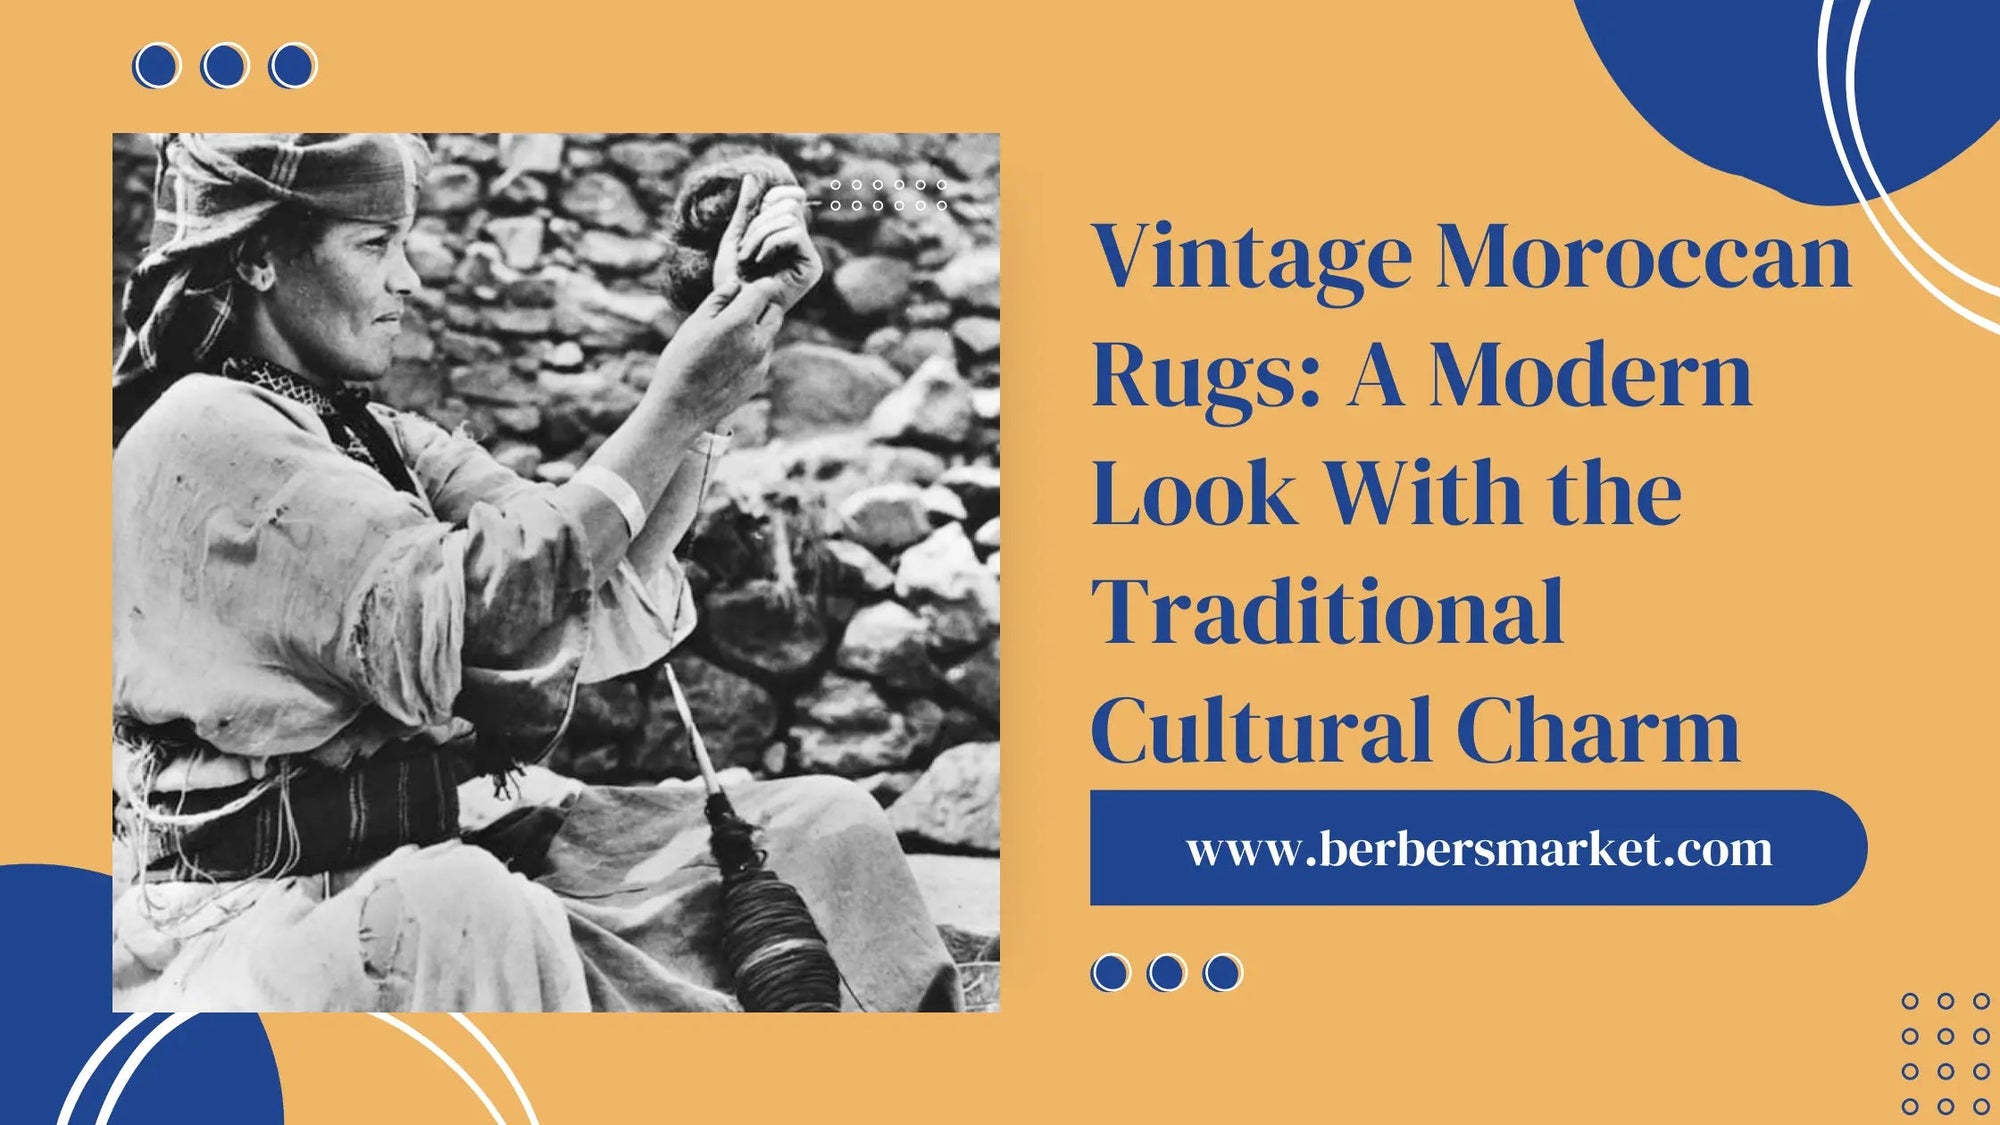 Blog banner talking about: "Vintage Moroccan Rugs: A Modern Look With the Traditional Cultural Charm" with a picture showing a Berber craftswoman woman spinning wool